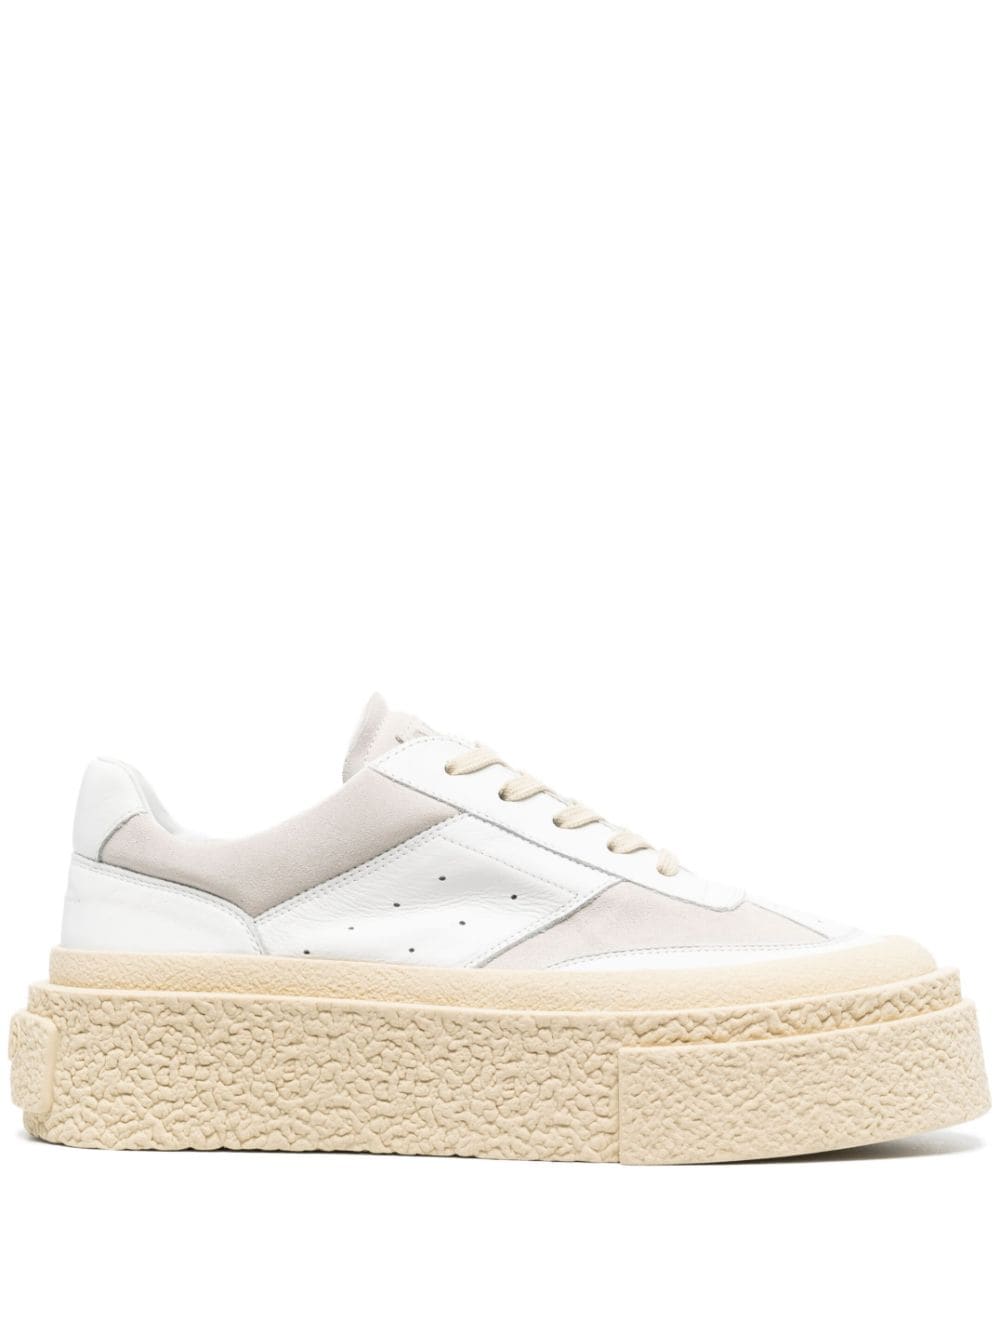 Mm6 Maison Margiela Perforated-detail Leather Sneakers In White